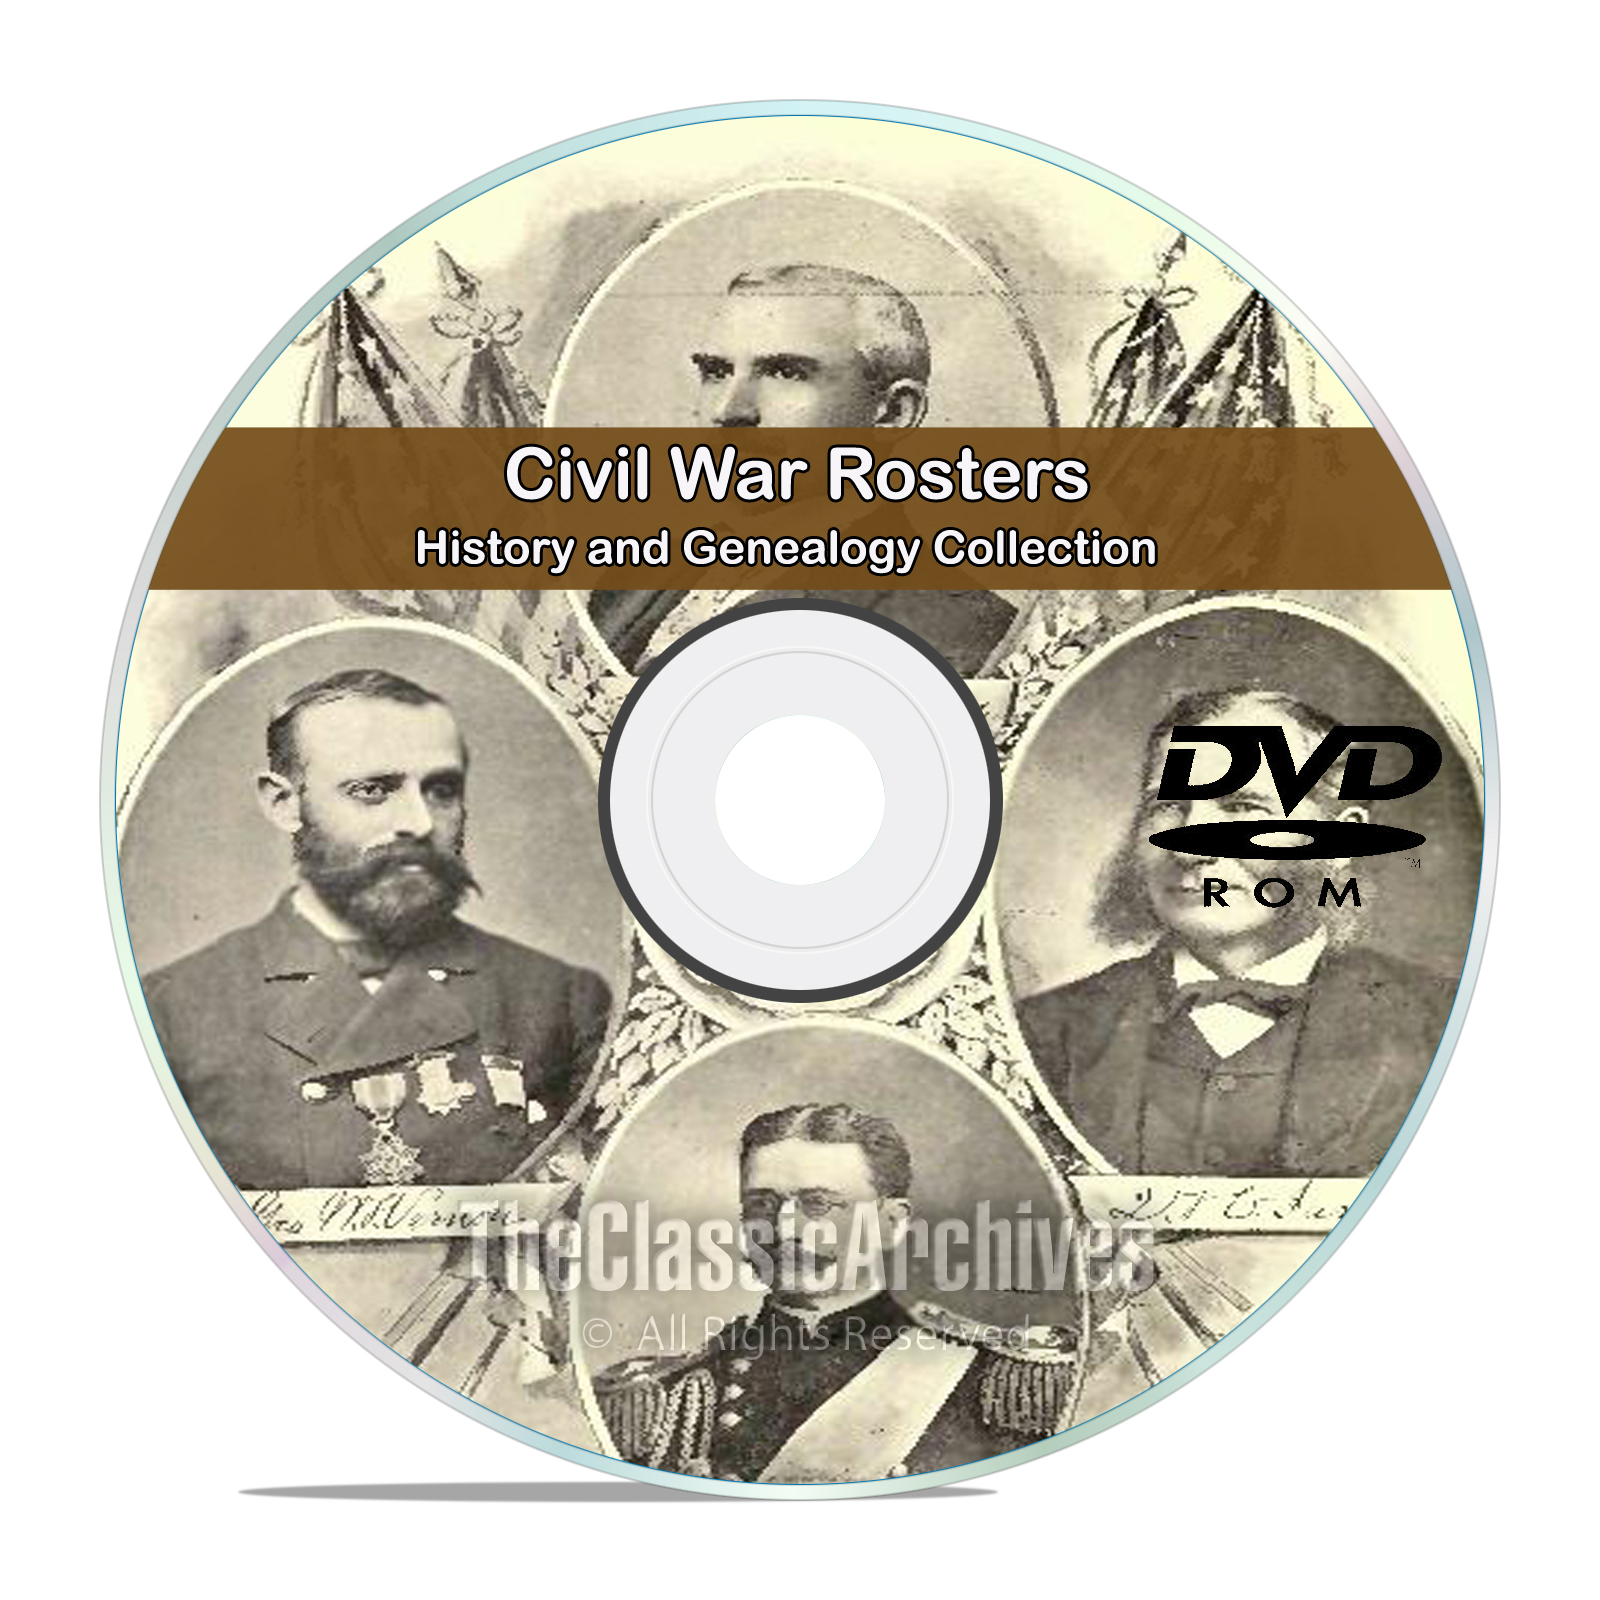 Civil War Rosters, 77 Classic Books, History and Genealogy, Names on DVD - Click Image to Close